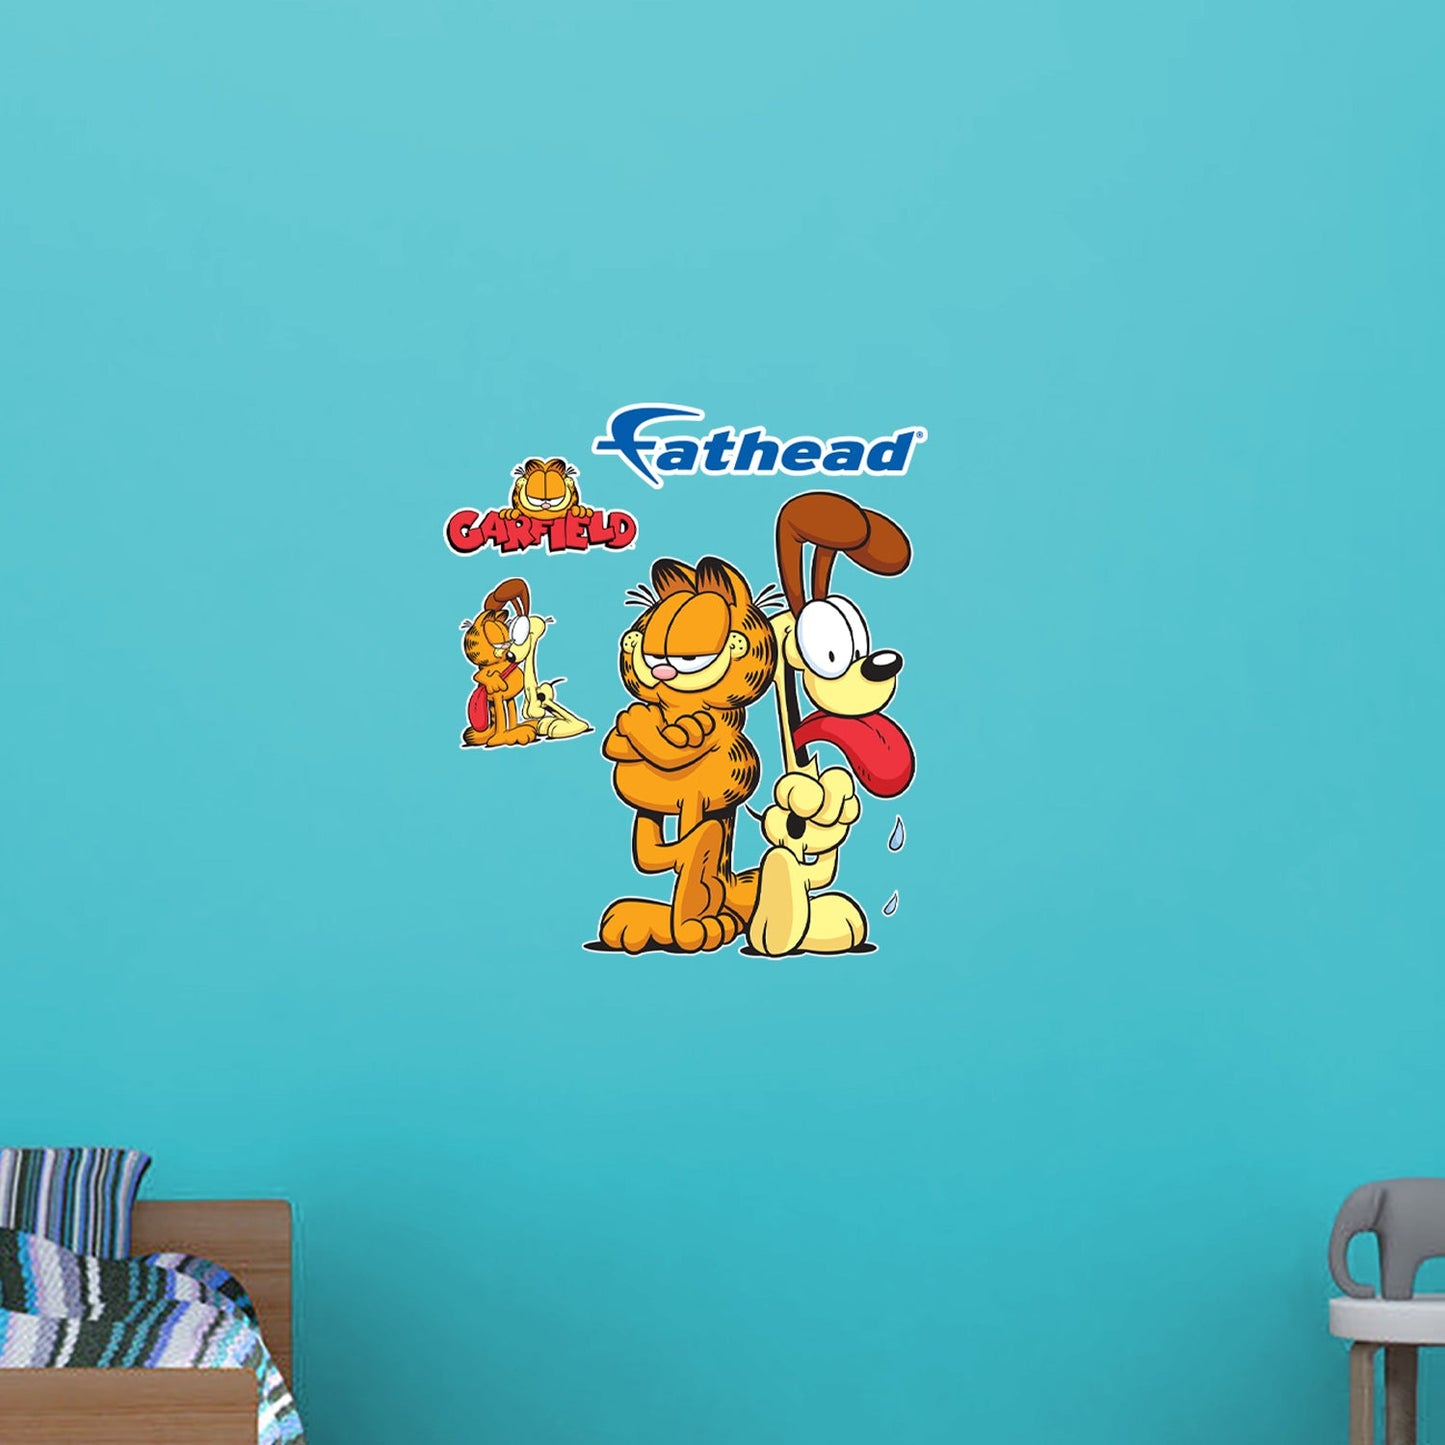 Garfield: Garfield & Odie RealBigs - Officially Licensed Nickelodeon Removable Adhesive Decal